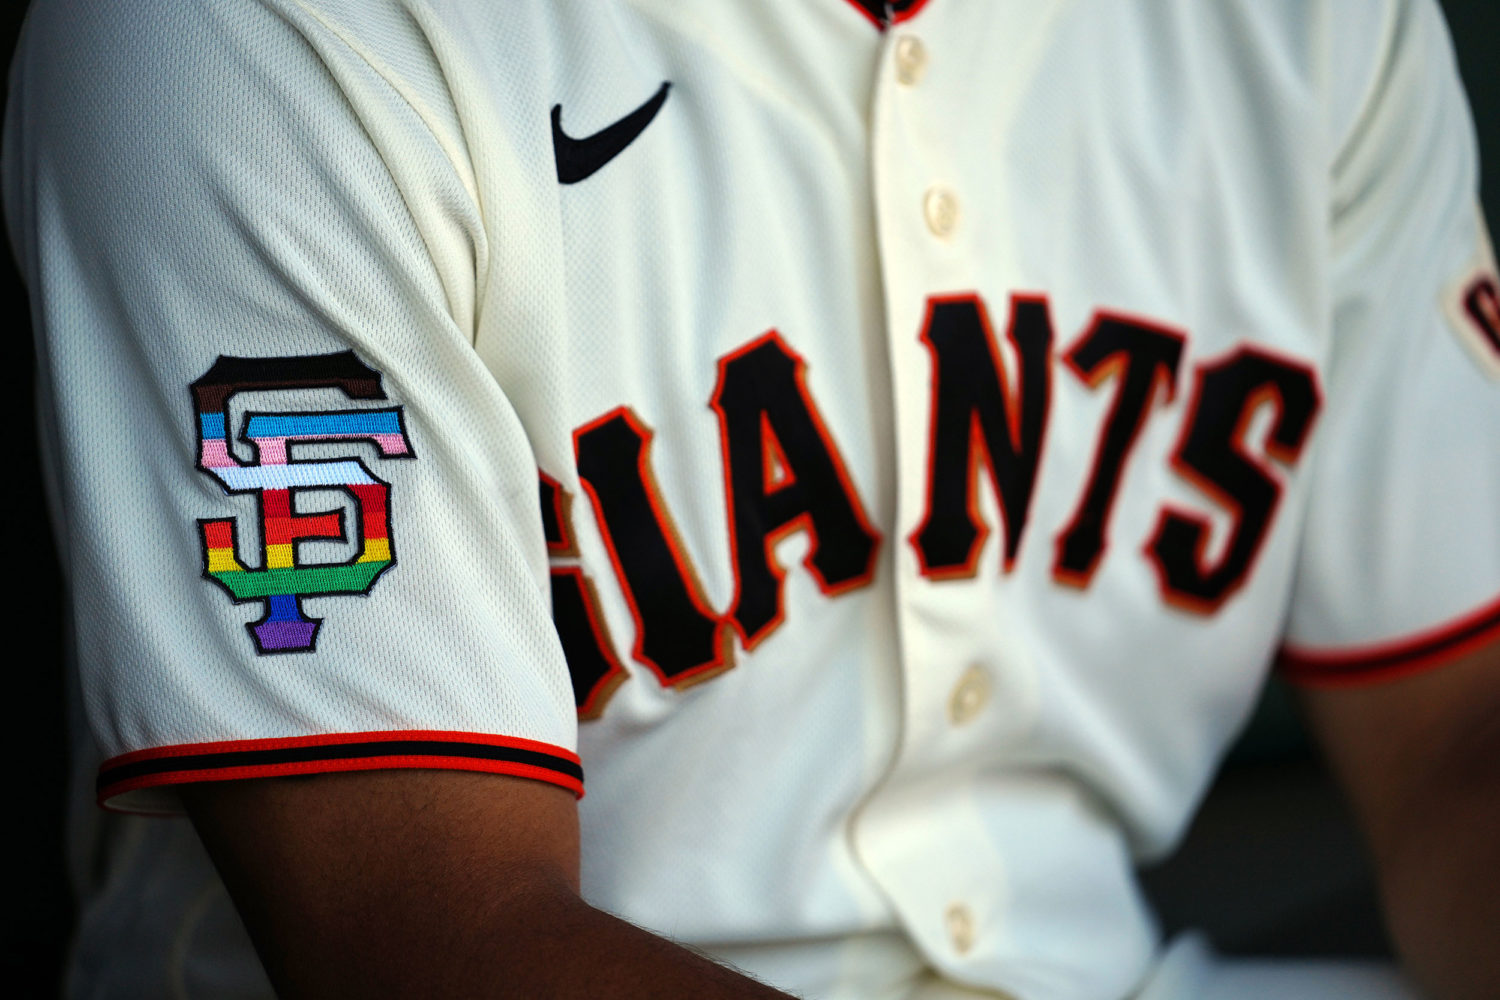 US culture wars come to baseball as MLB celebrates Pride month, MLB